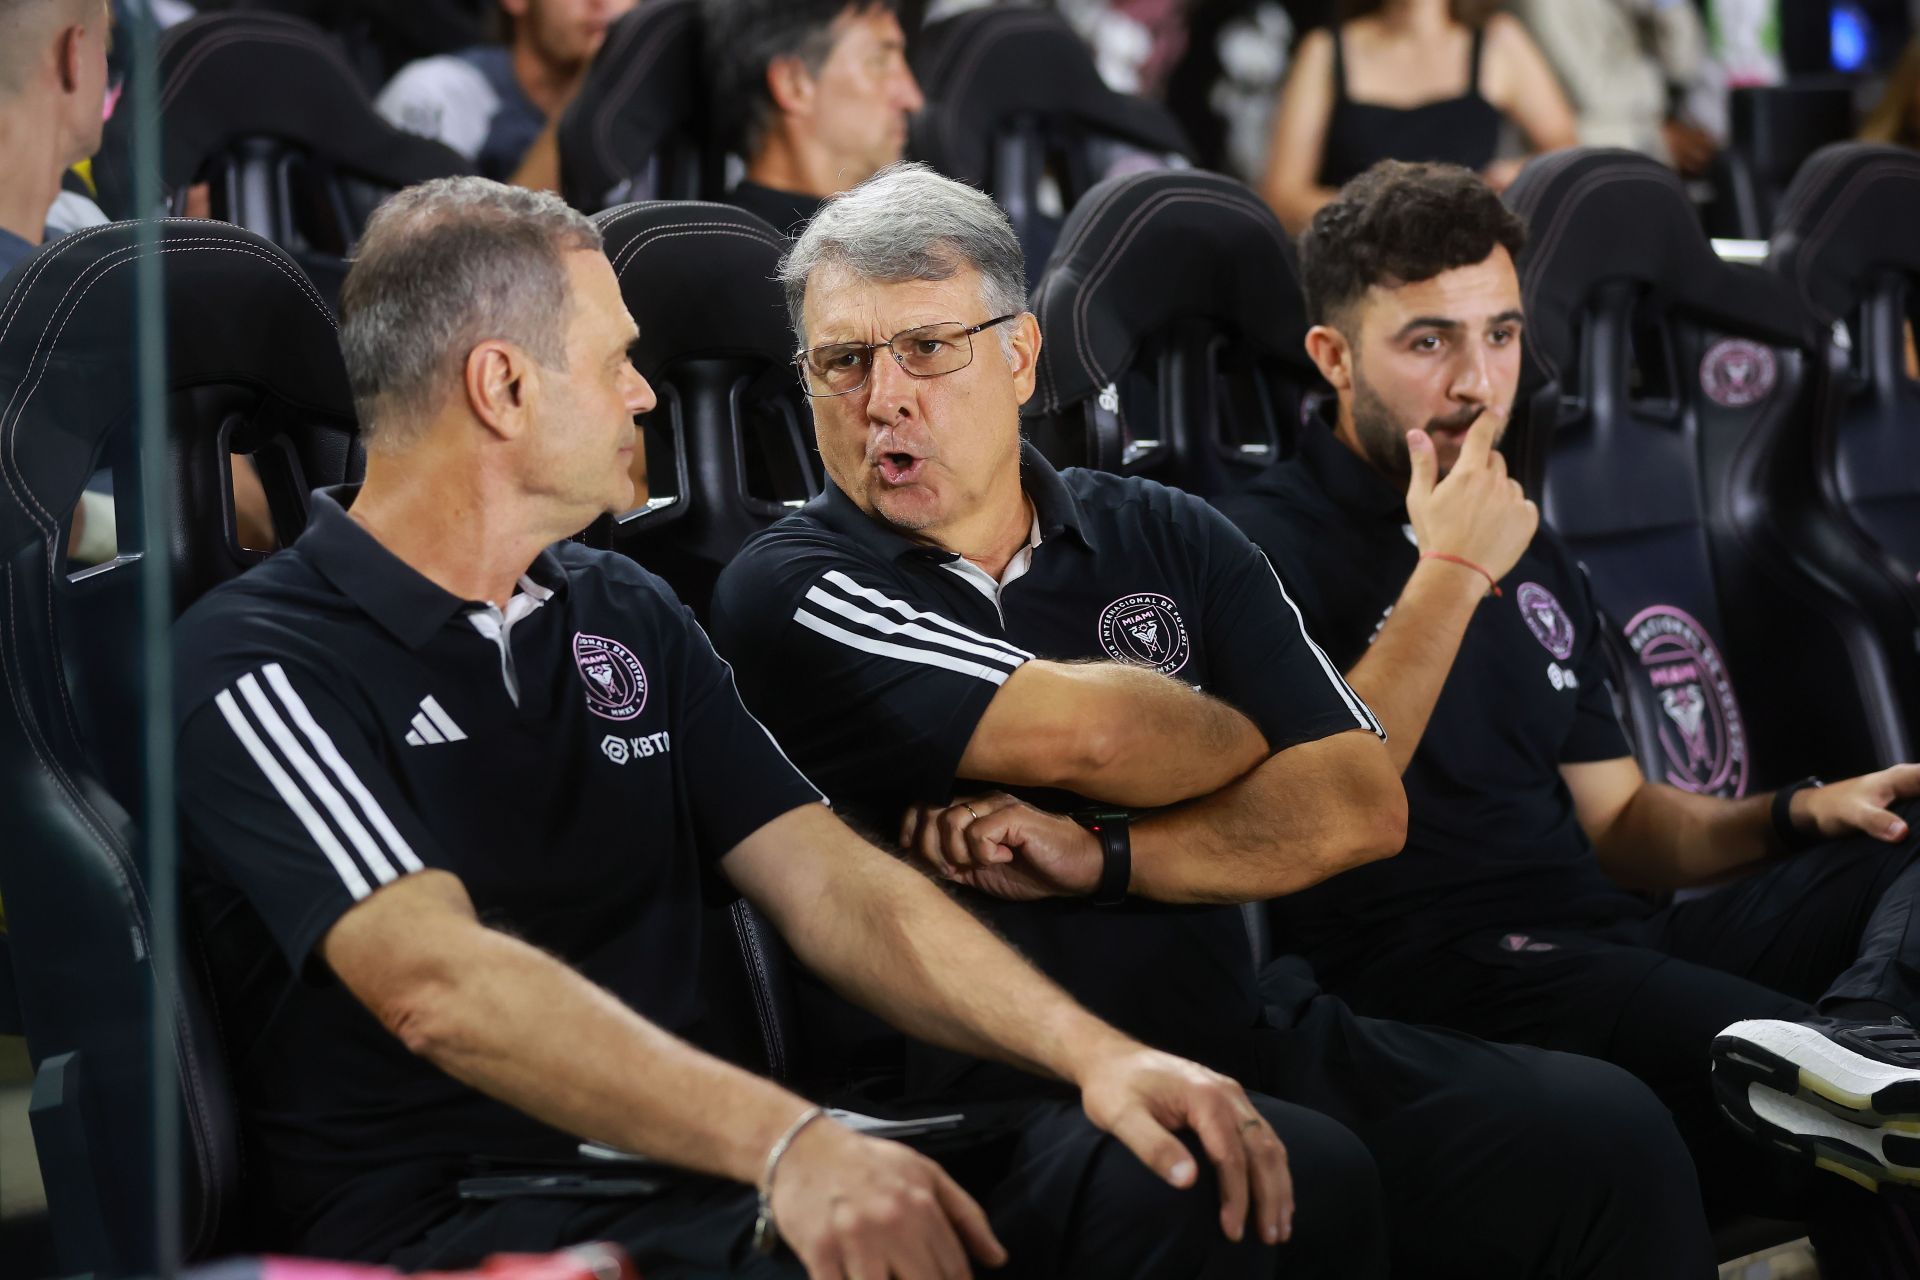 Gerardo Martino (middle) quashed suggestions Lionel Messi might be injured.